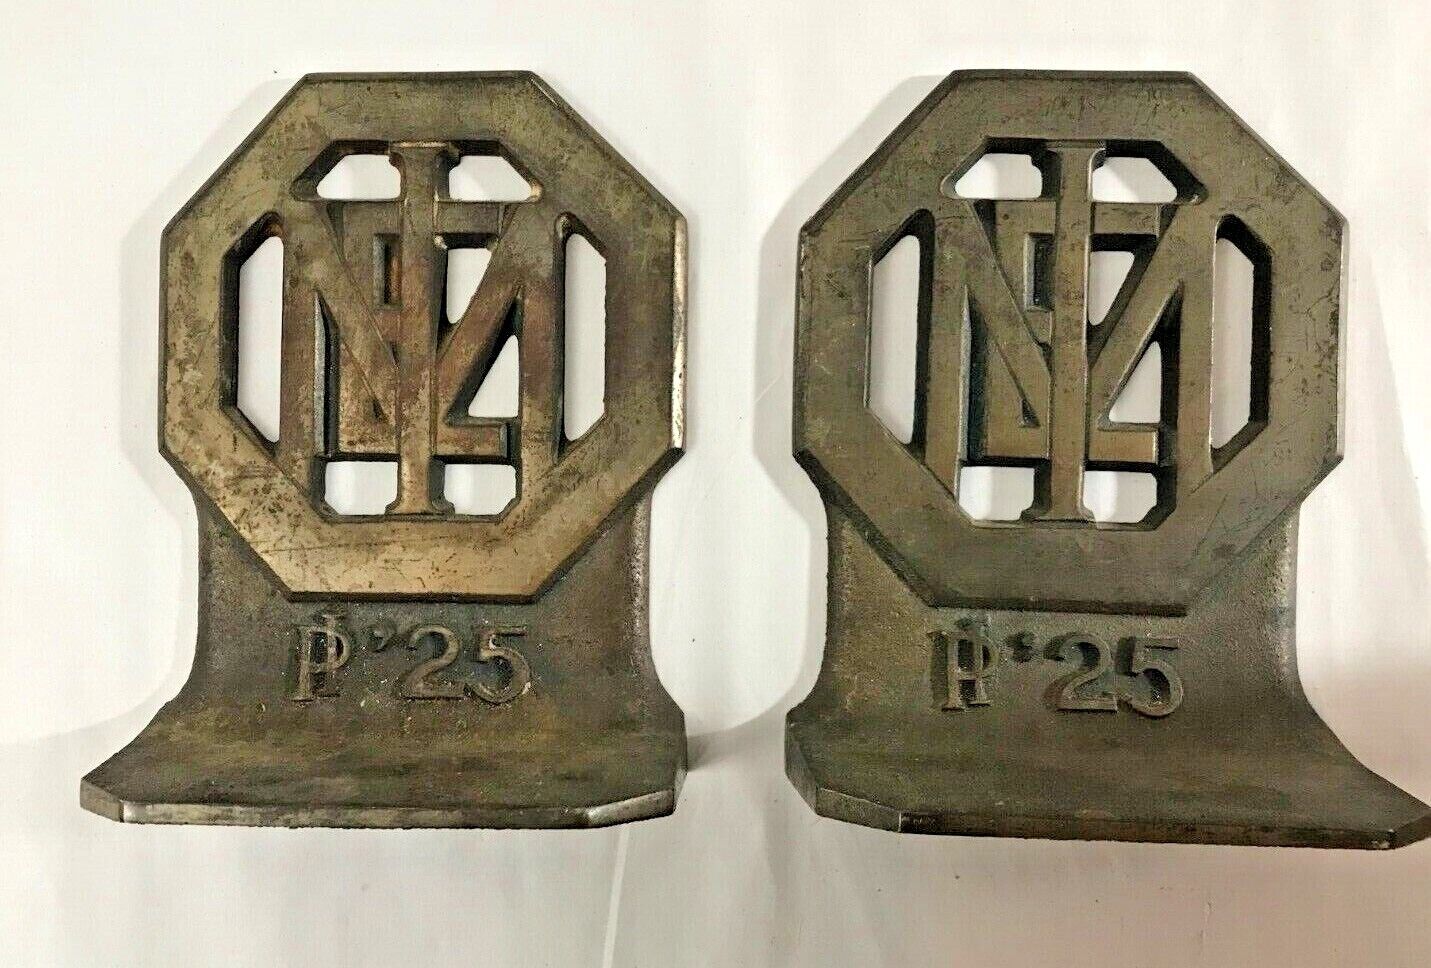 PAIR OF CAST IRON HEXAGON BOOKENDS //P 25 // M E T 